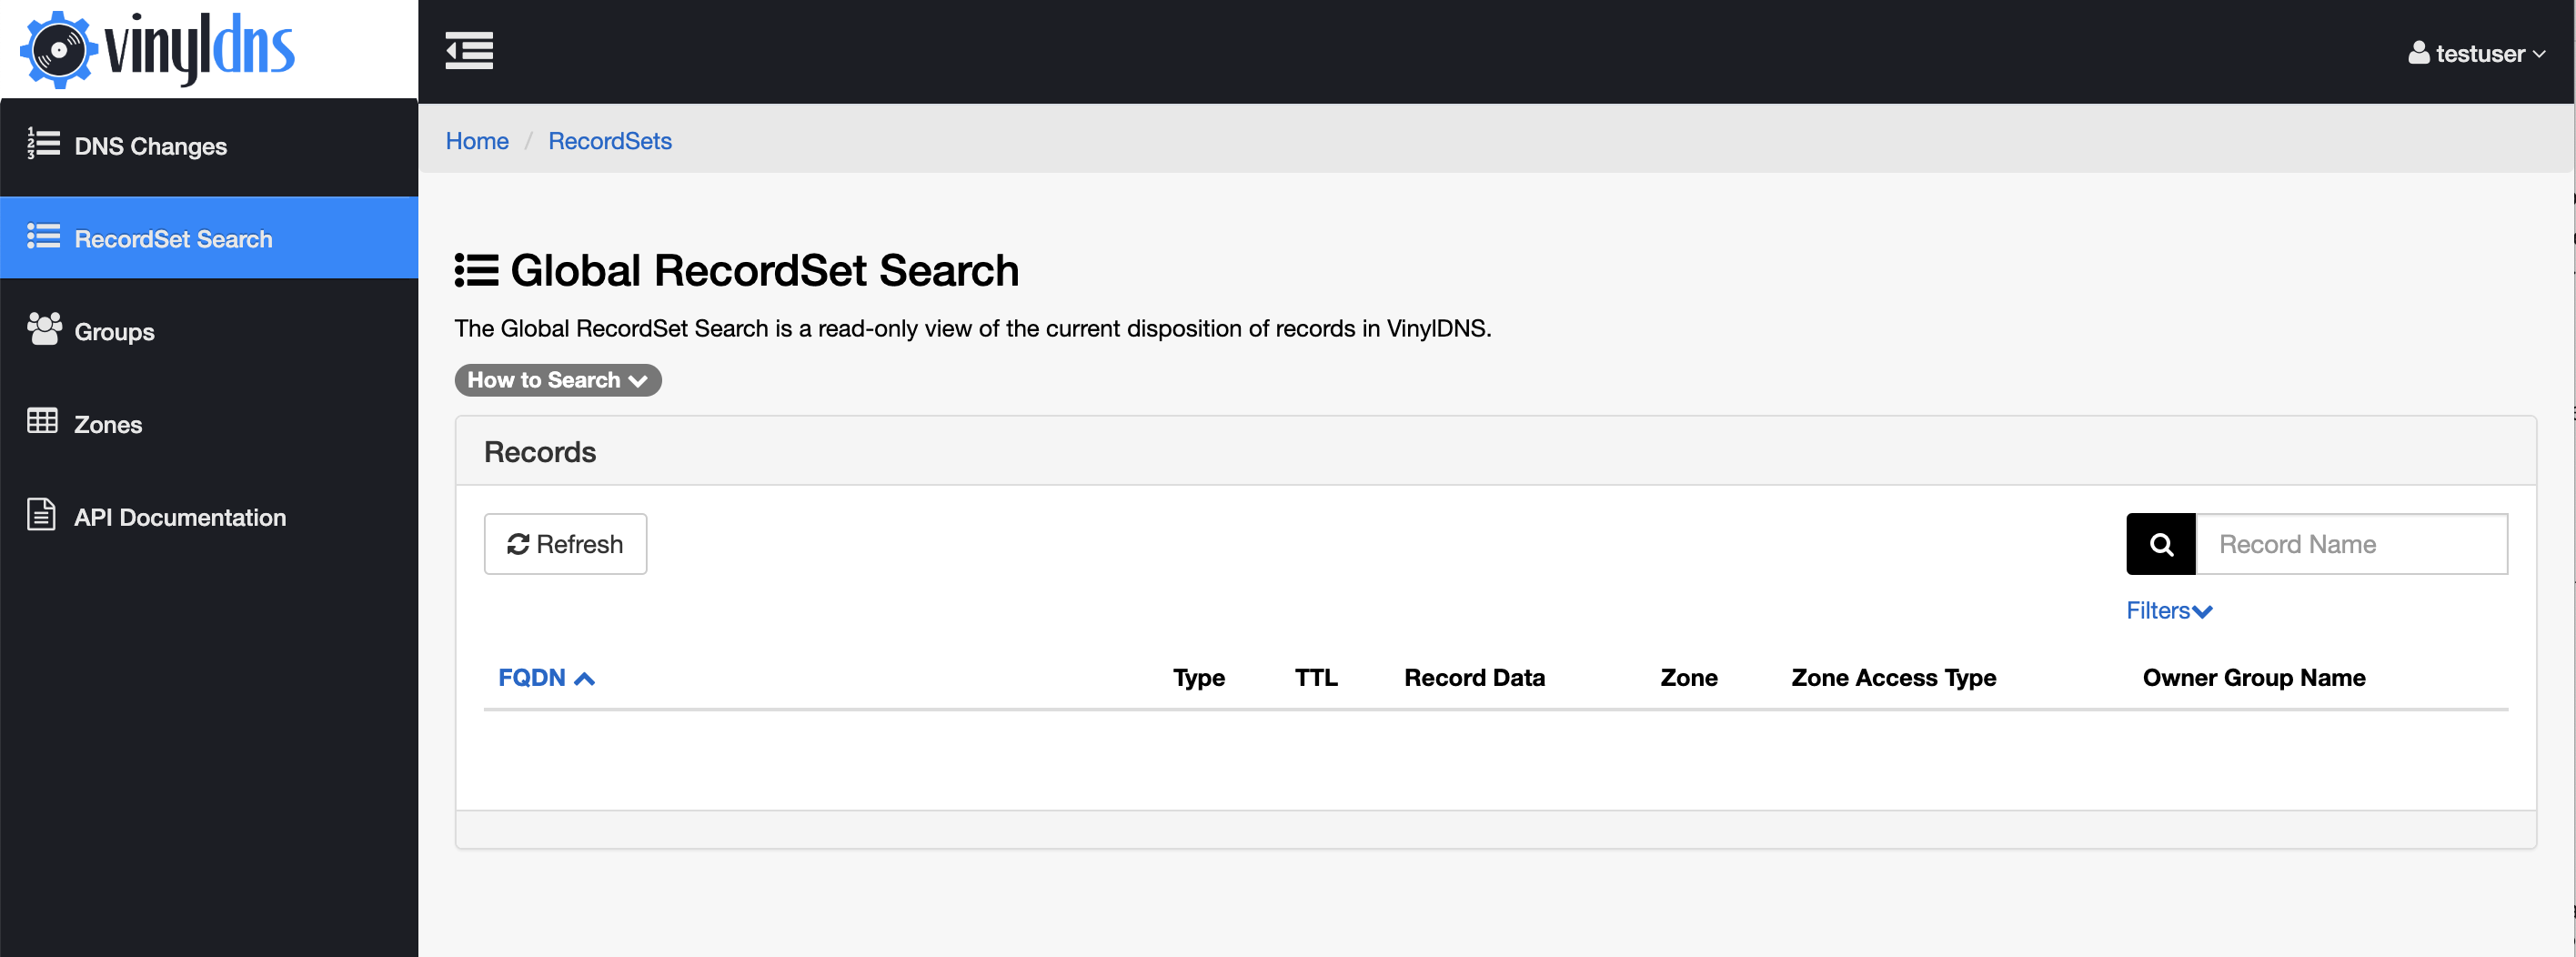 RecordSet Search main page screenshot